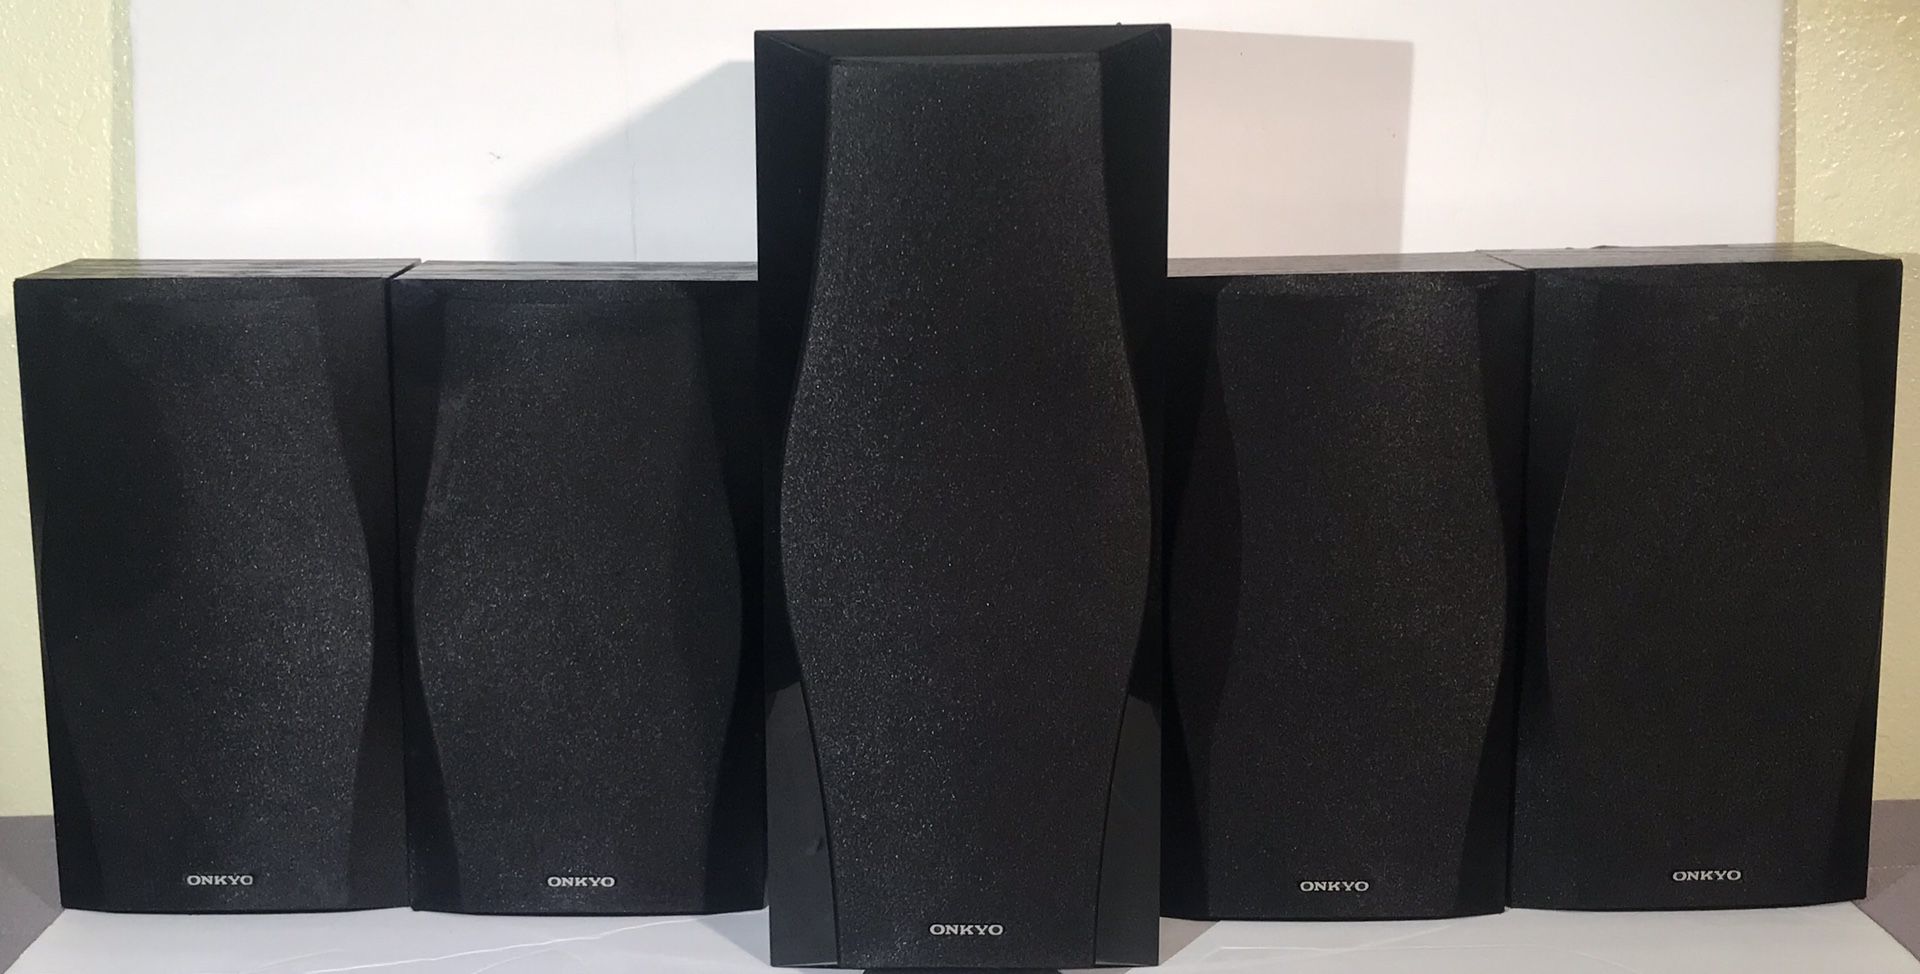 Onkyo Speakers - 1 Front SKC-560F And 4 Back SKF-560-130 W